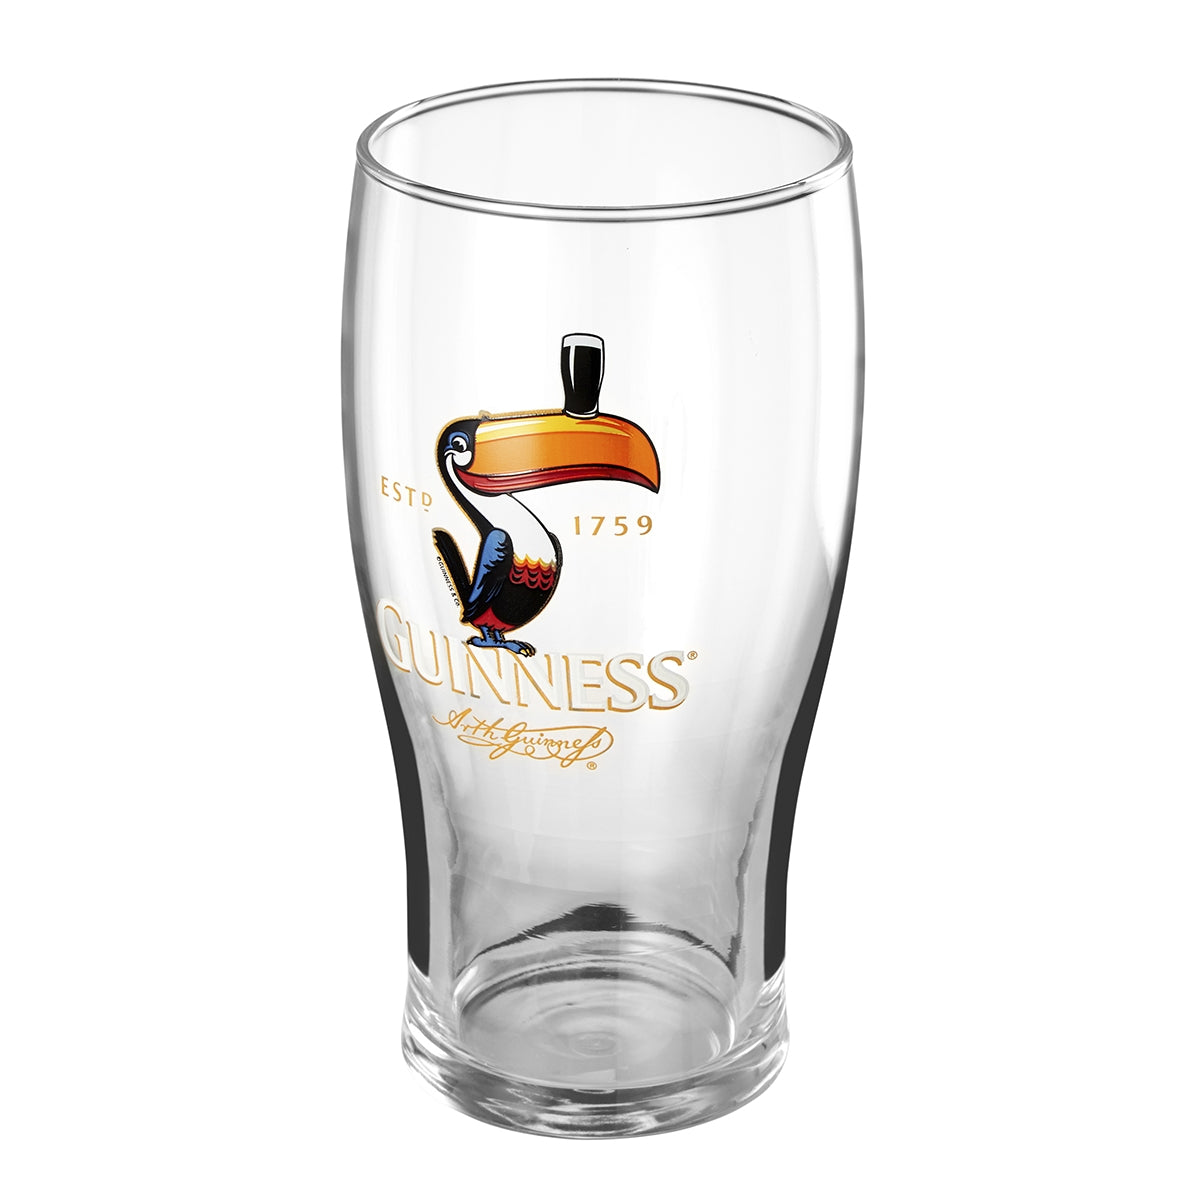 A pint glass with an image of a Guinness Toucan Pint Glass - 24 Pack with the brand name Guinness UK.